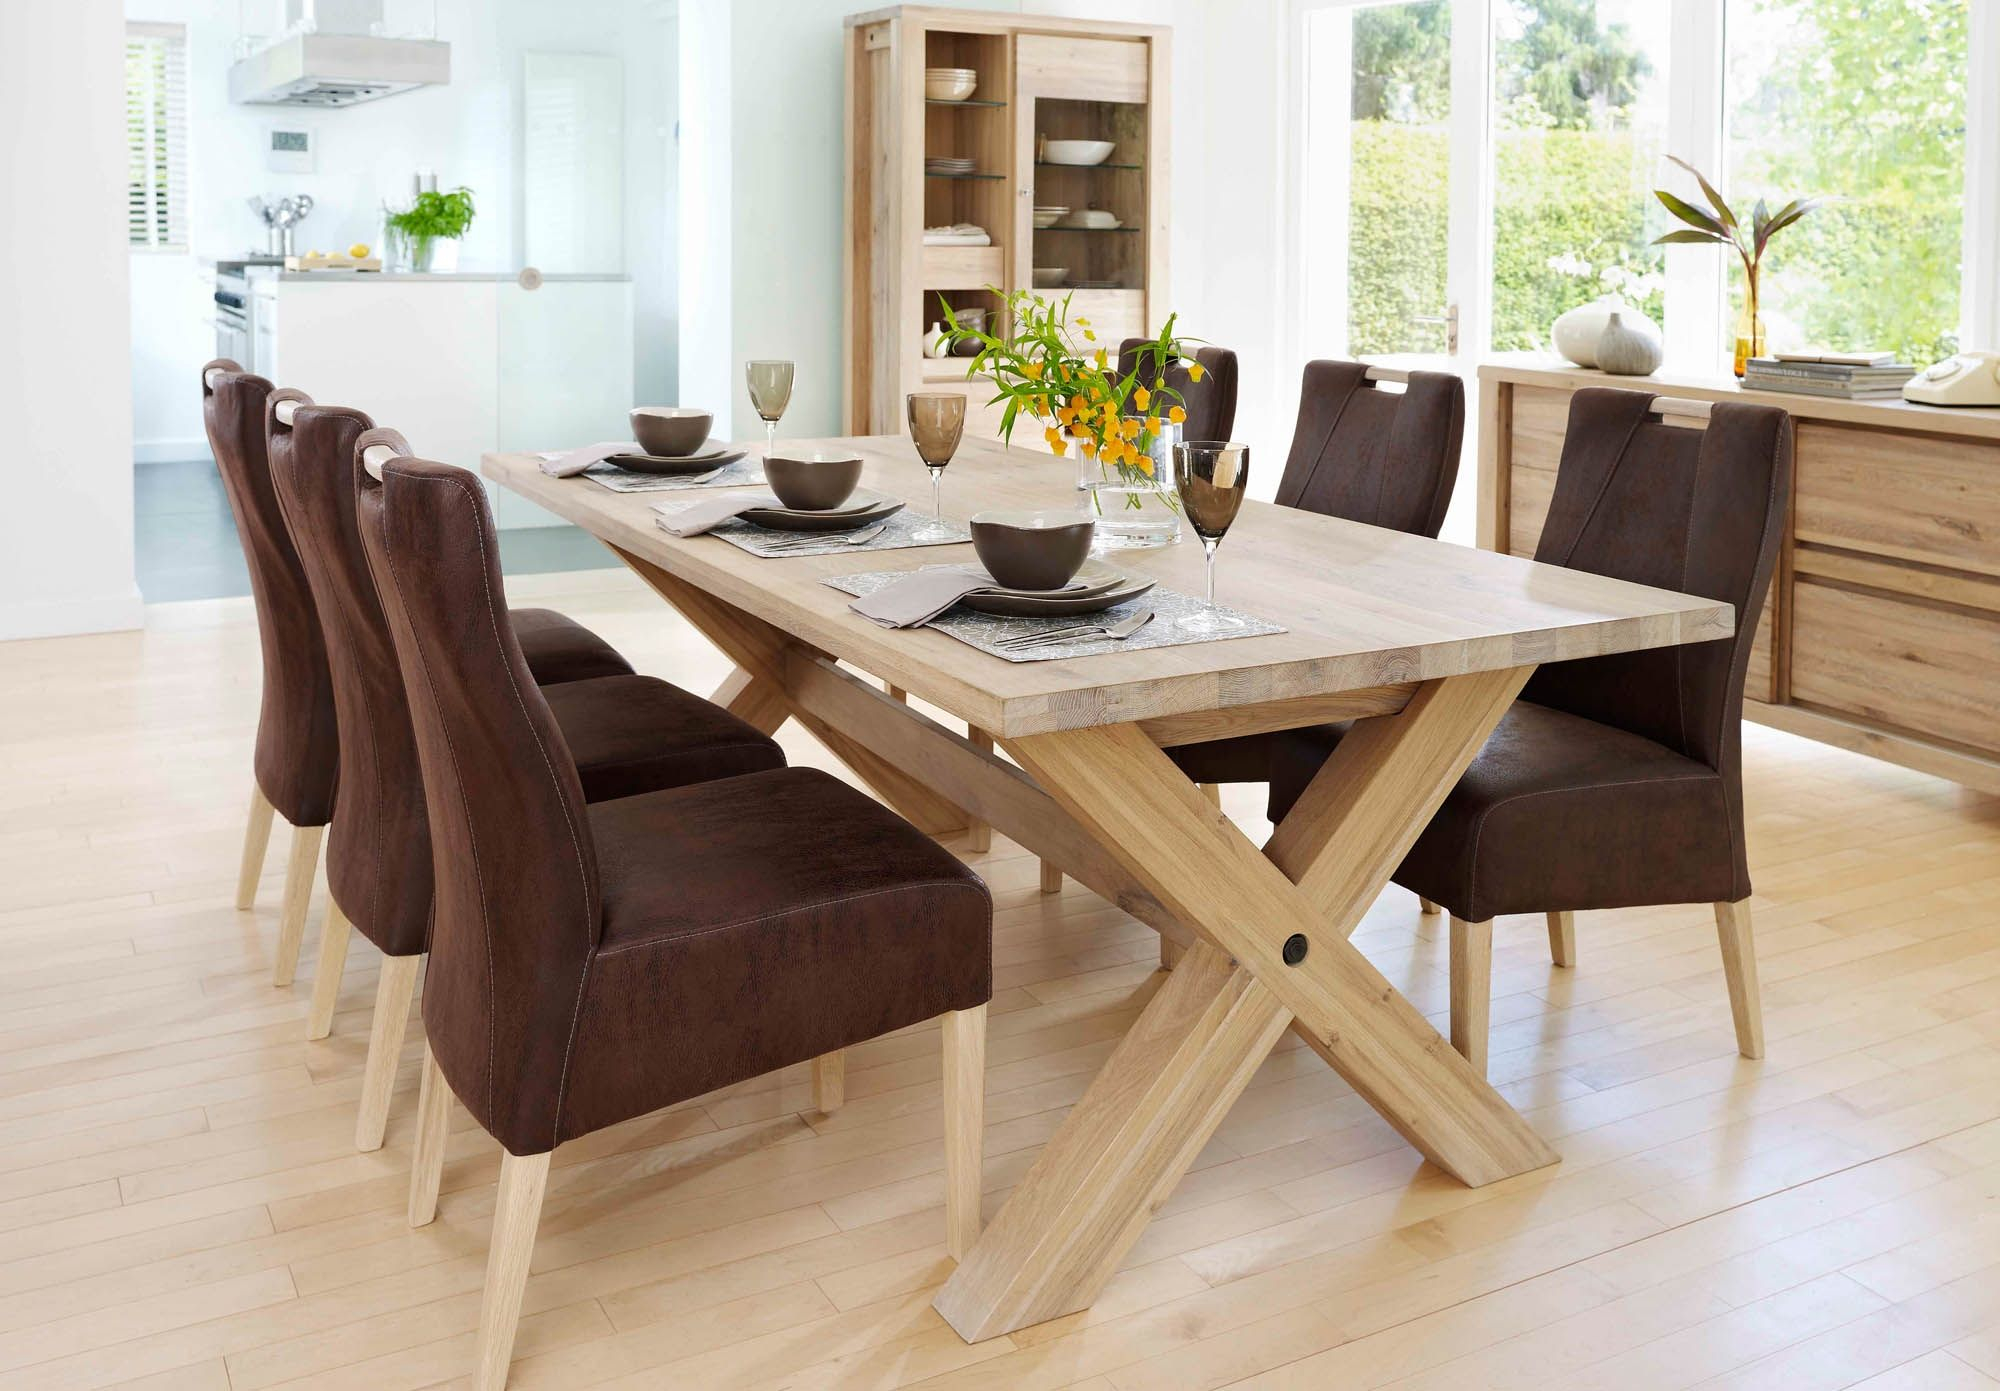 Habufa Winsgate Dining Table At Furniture Village Habufa intended for sizing 2000 X 1391